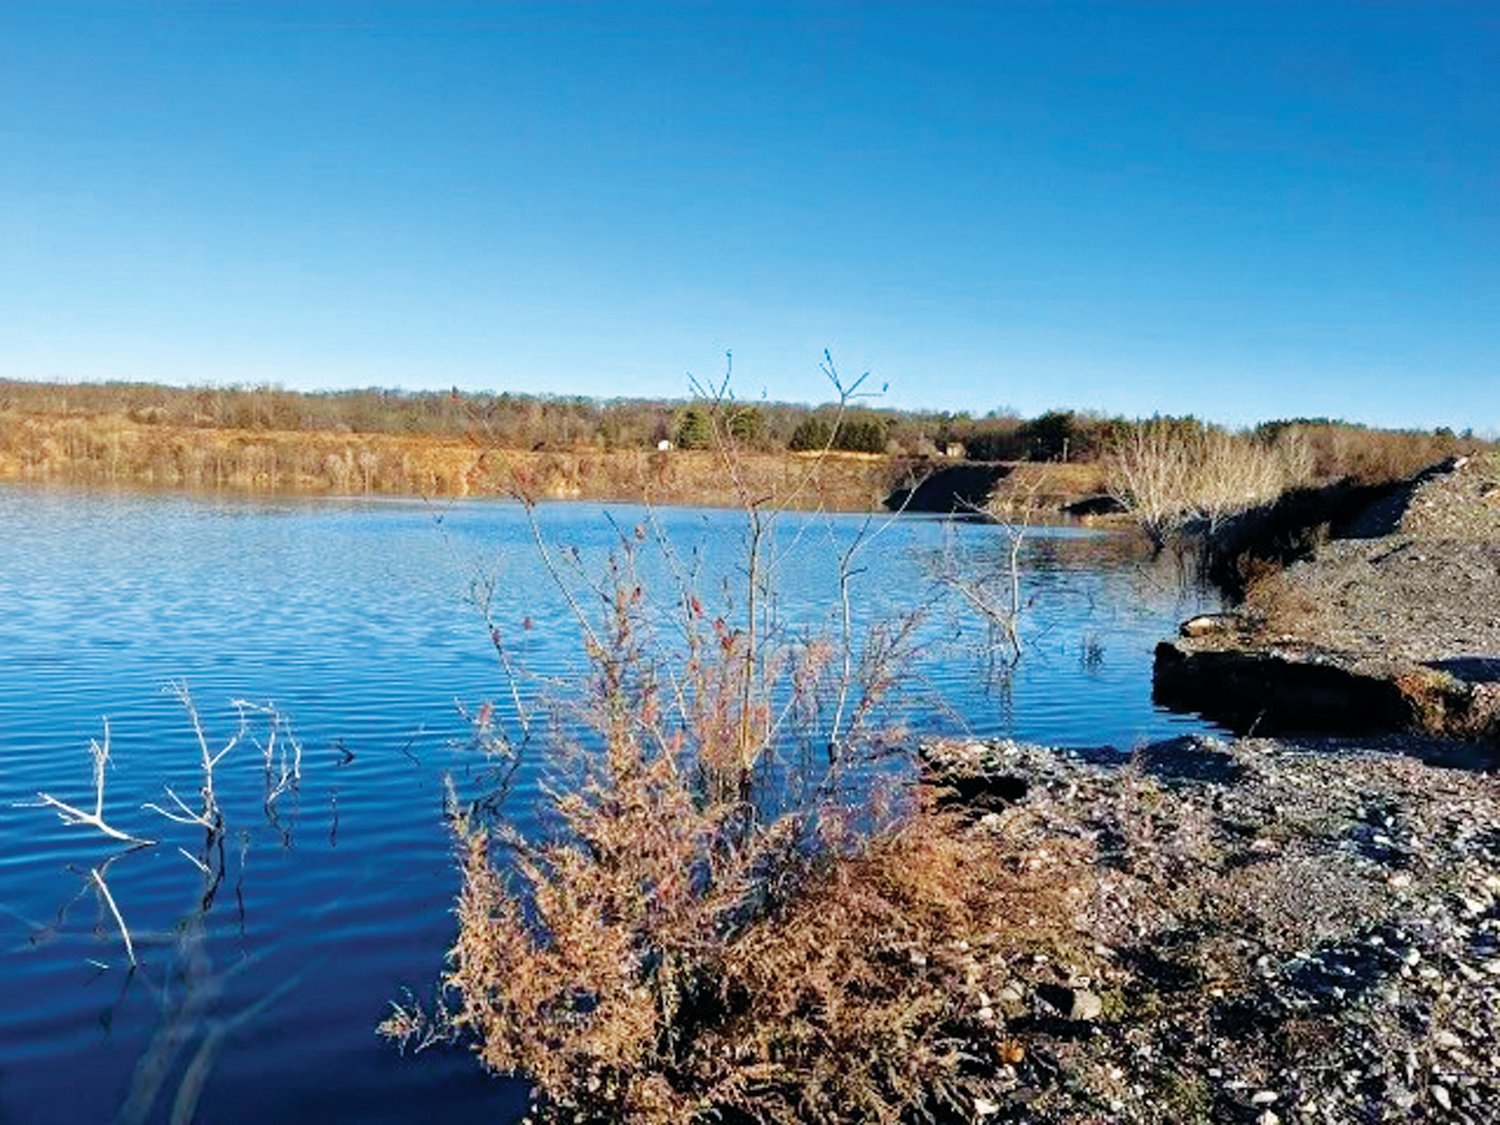 CONTRIBUTED PHOTO
The New Hope Crushed Stone Quarry left behind a dried-up creek, a pond at Phillips’ Mill filled with silt, fields covered with dust, dangerous sinkholes and dried-up wells. Now a 75-acre lake graces the 166-acre property in Solebury.